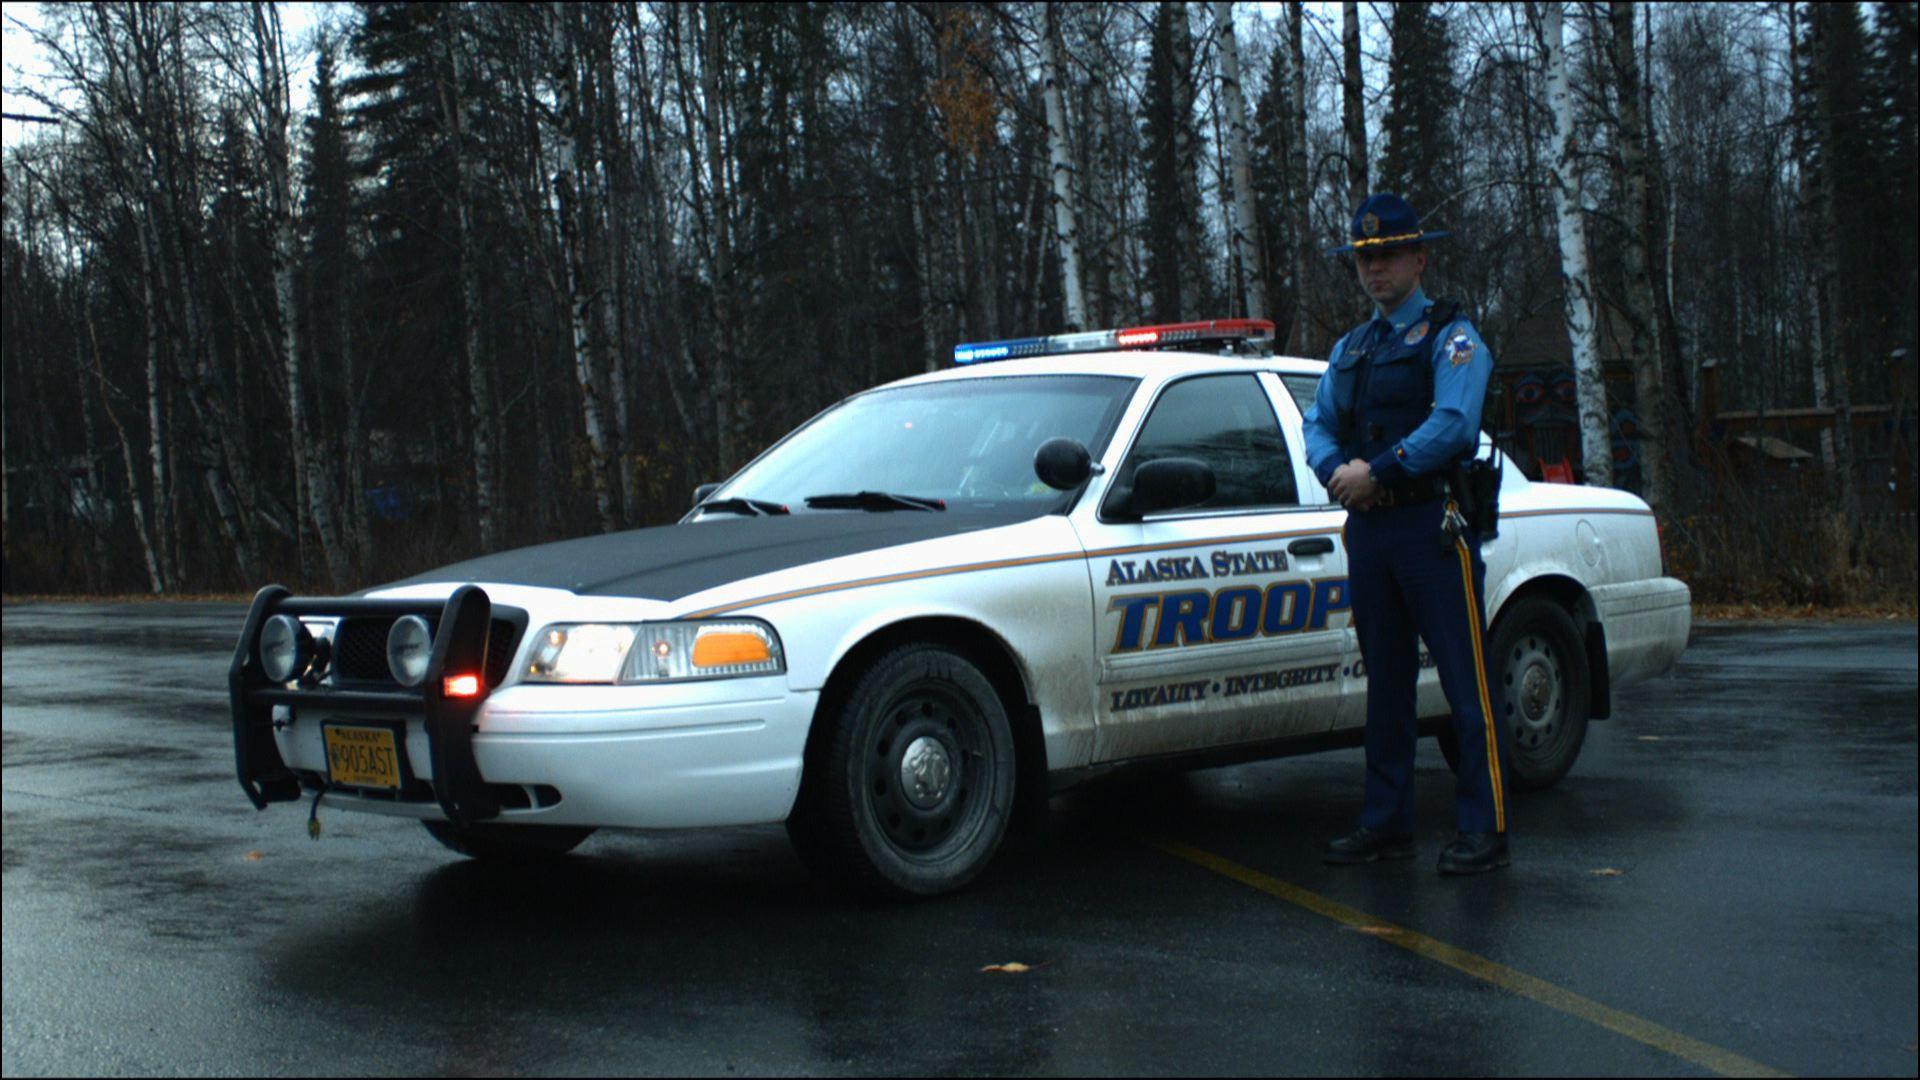 Alaska State Troopers Wallpaper Archives